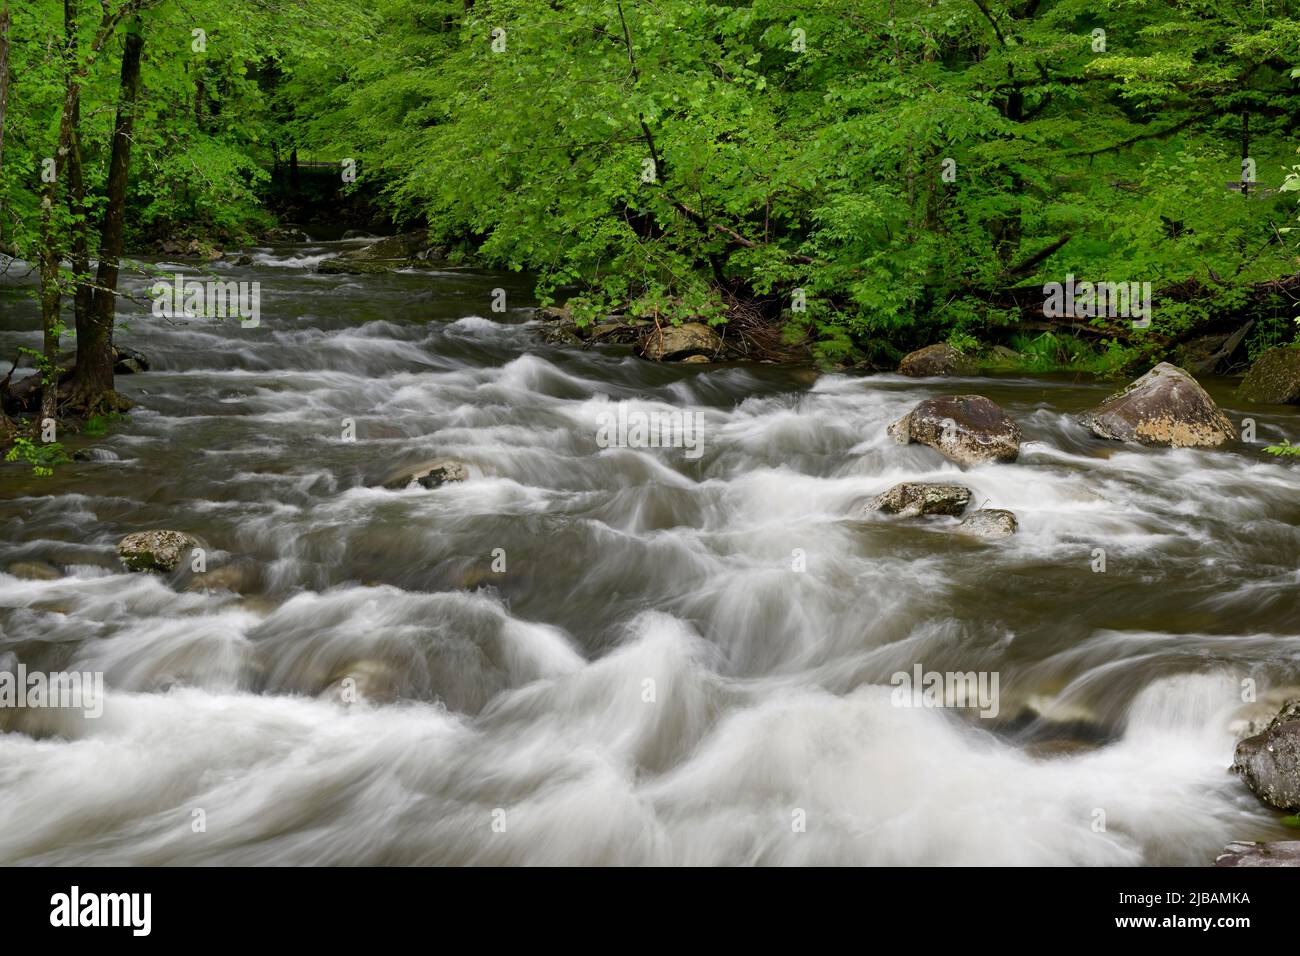 Cascades in the Middle prong of the Little Pigeon River in Great Smoky Mountains, TN, USA in early springtime Stock Photo